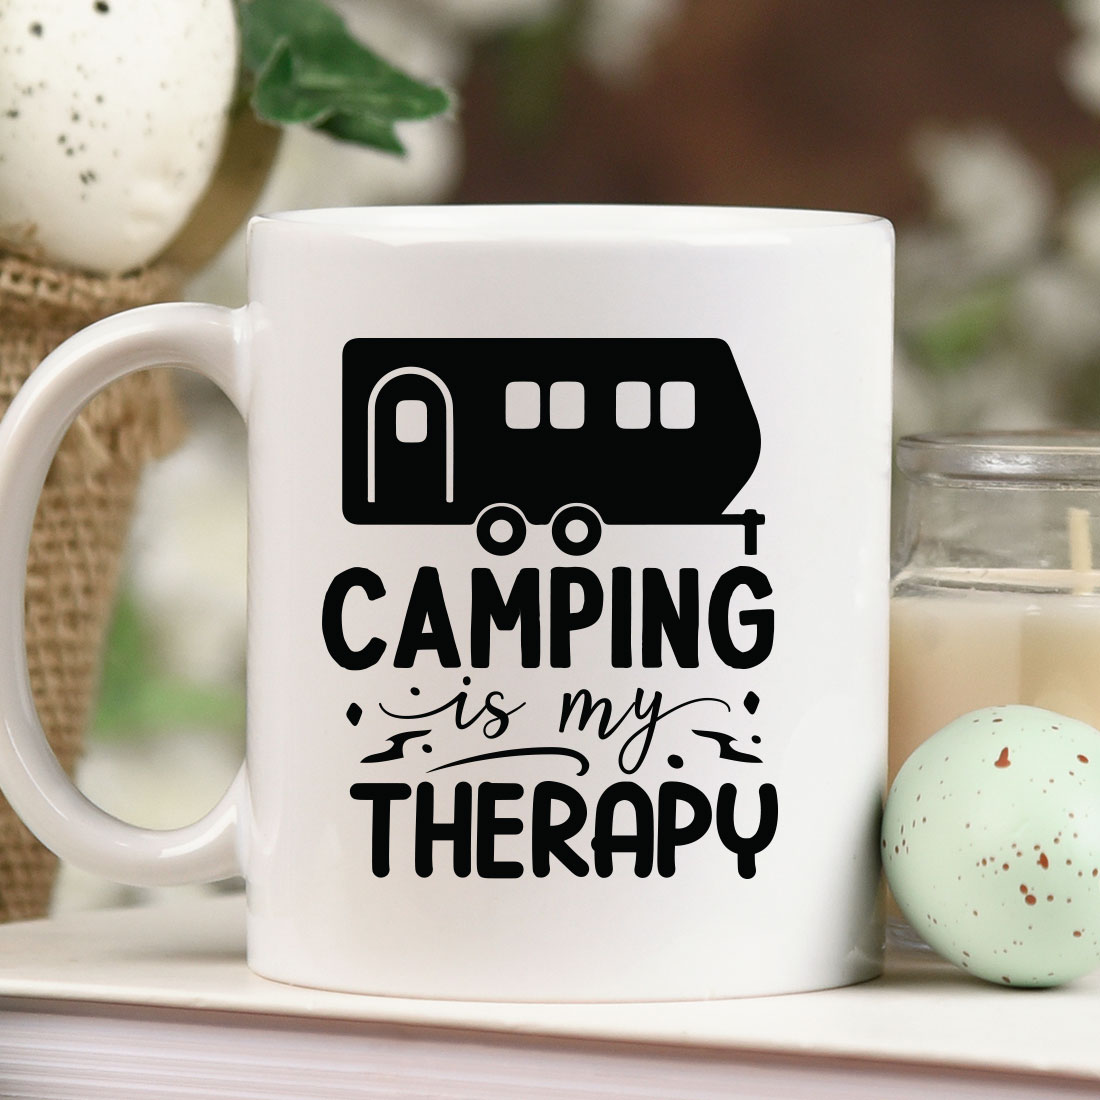 Coffee mug that says camping is my therapy.